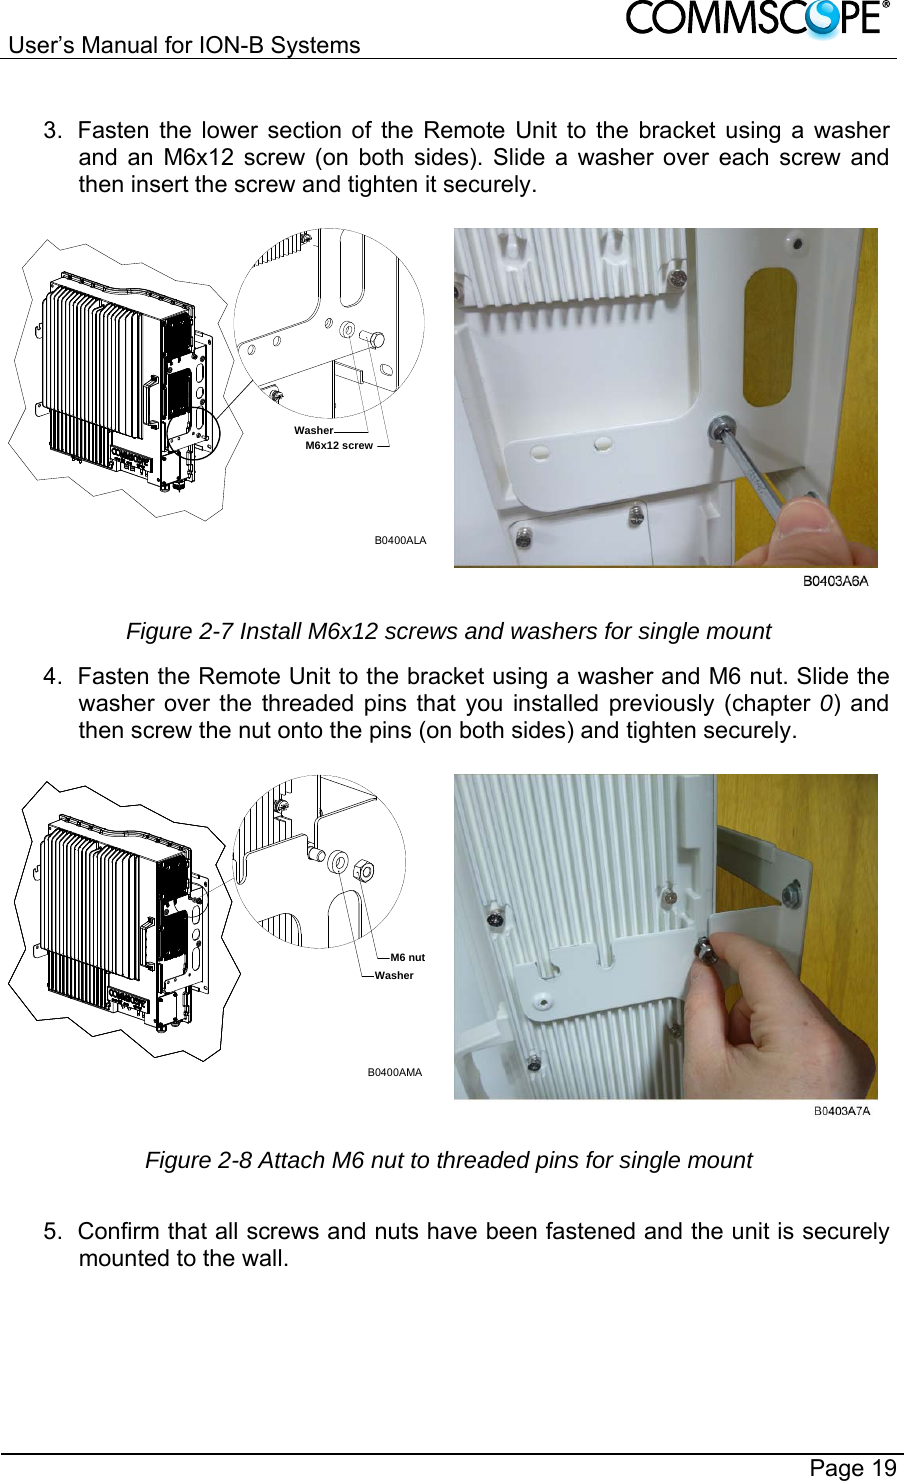 User’s Manual for ION-B Systems       Page 19  3.  Fasten the lower section of the Remote Unit to the bracket using a washer and an M6x12 screw (on both sides). Slide a washer over each screw and then insert the screw and tighten it securely. B0400ALAM6x12 screwWasher Figure 2-7 Install M6x12 screws and washers for single mount 4.  Fasten the Remote Unit to the bracket using a washer and M6 nut. Slide the washer over the threaded pins that you installed previously (chapter 0) and then screw the nut onto the pins (on both sides) and tighten securely. B0400AMAM6 nutWasher Figure 2-8 Attach M6 nut to threaded pins for single mount  5.  Confirm that all screws and nuts have been fastened and the unit is securely mounted to the wall. 